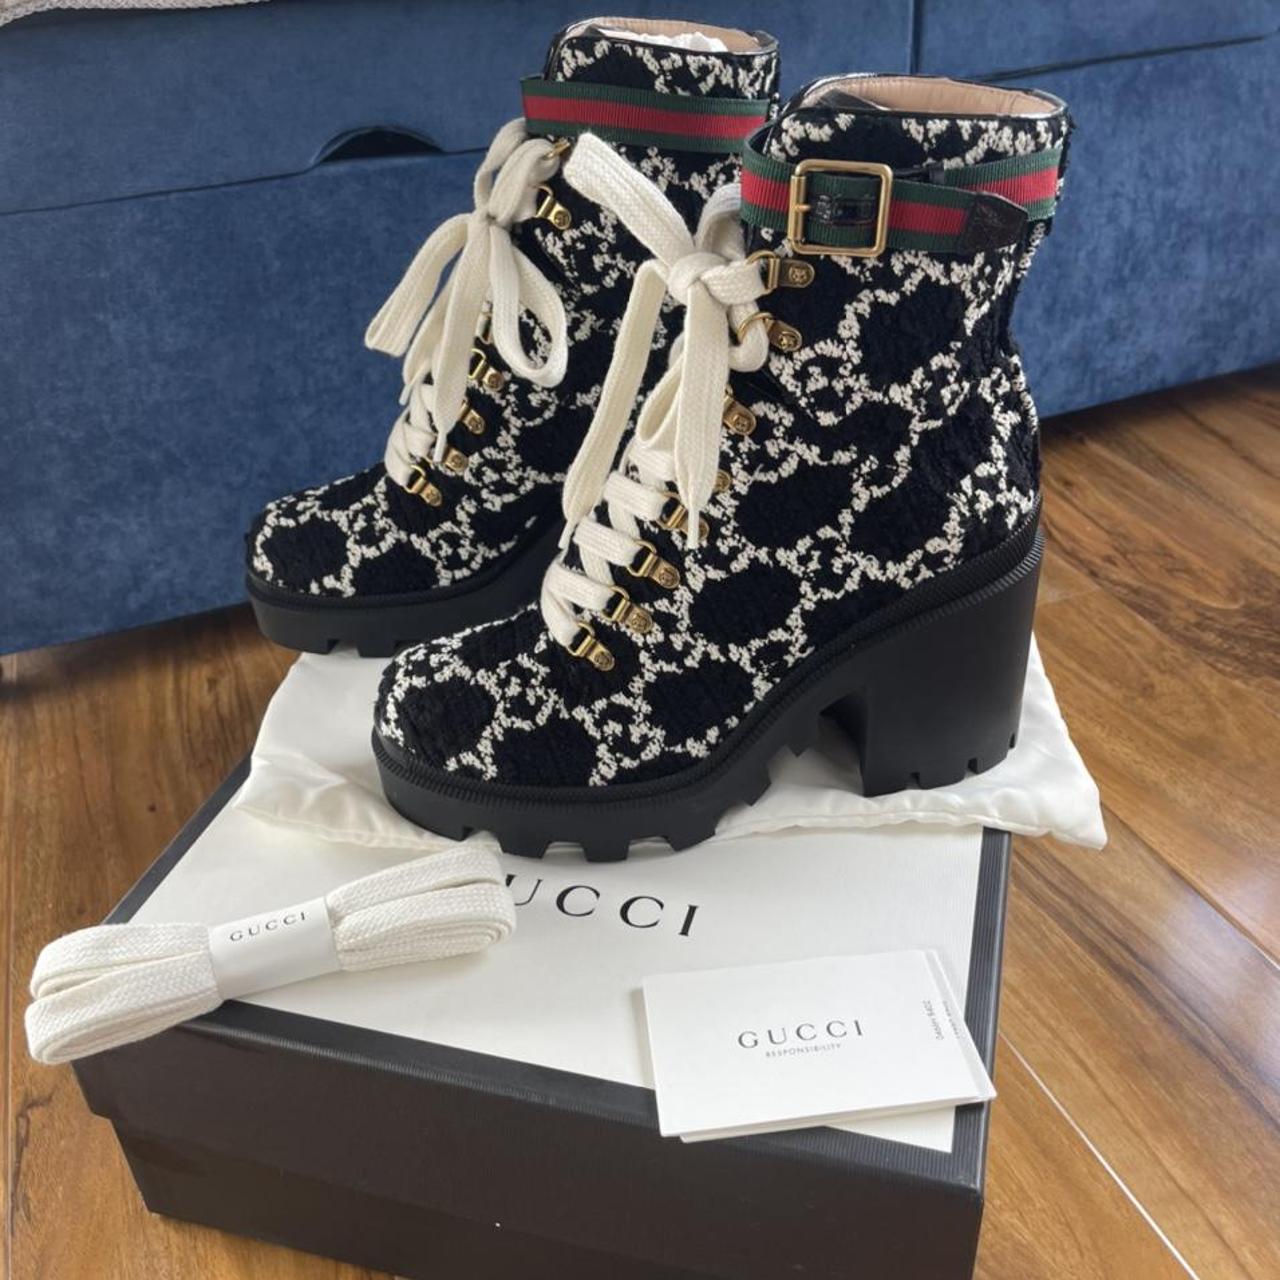 Stunning Womens gucci boots perfect christmas gift... - Depop